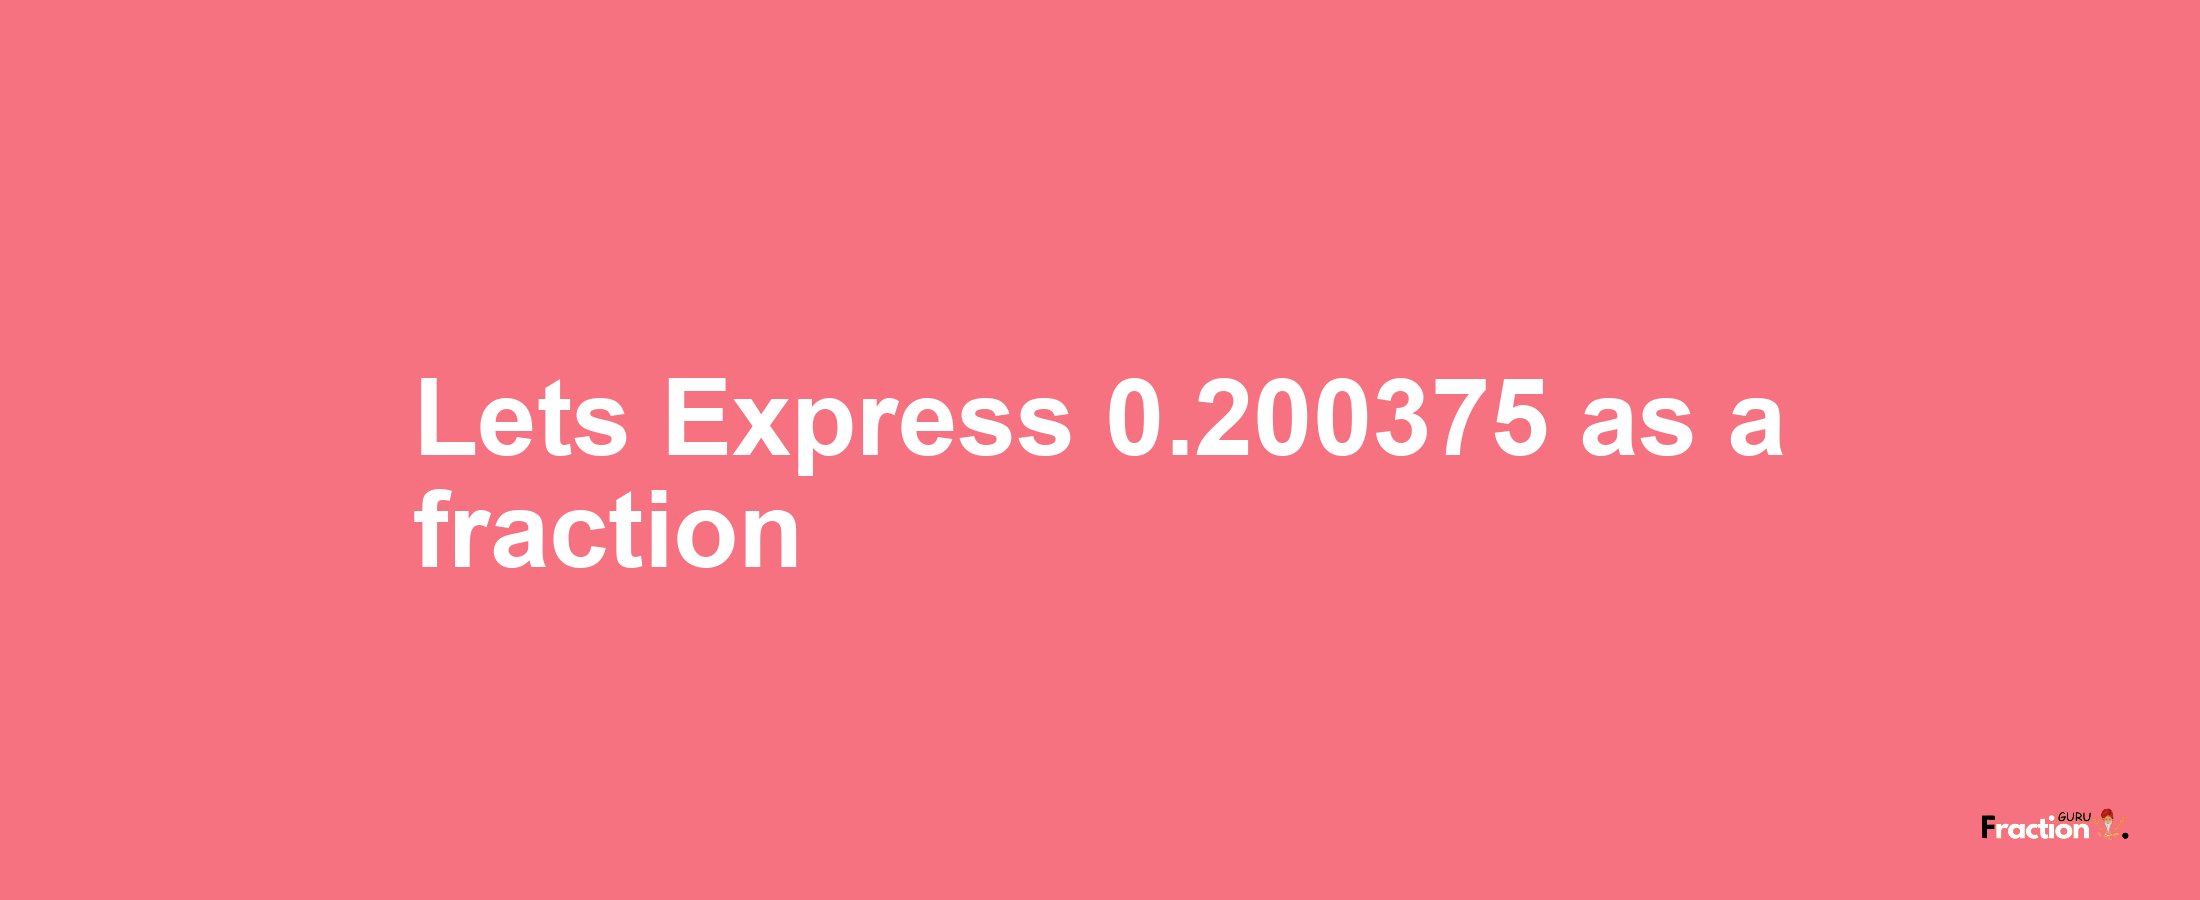 Lets Express 0.200375 as afraction